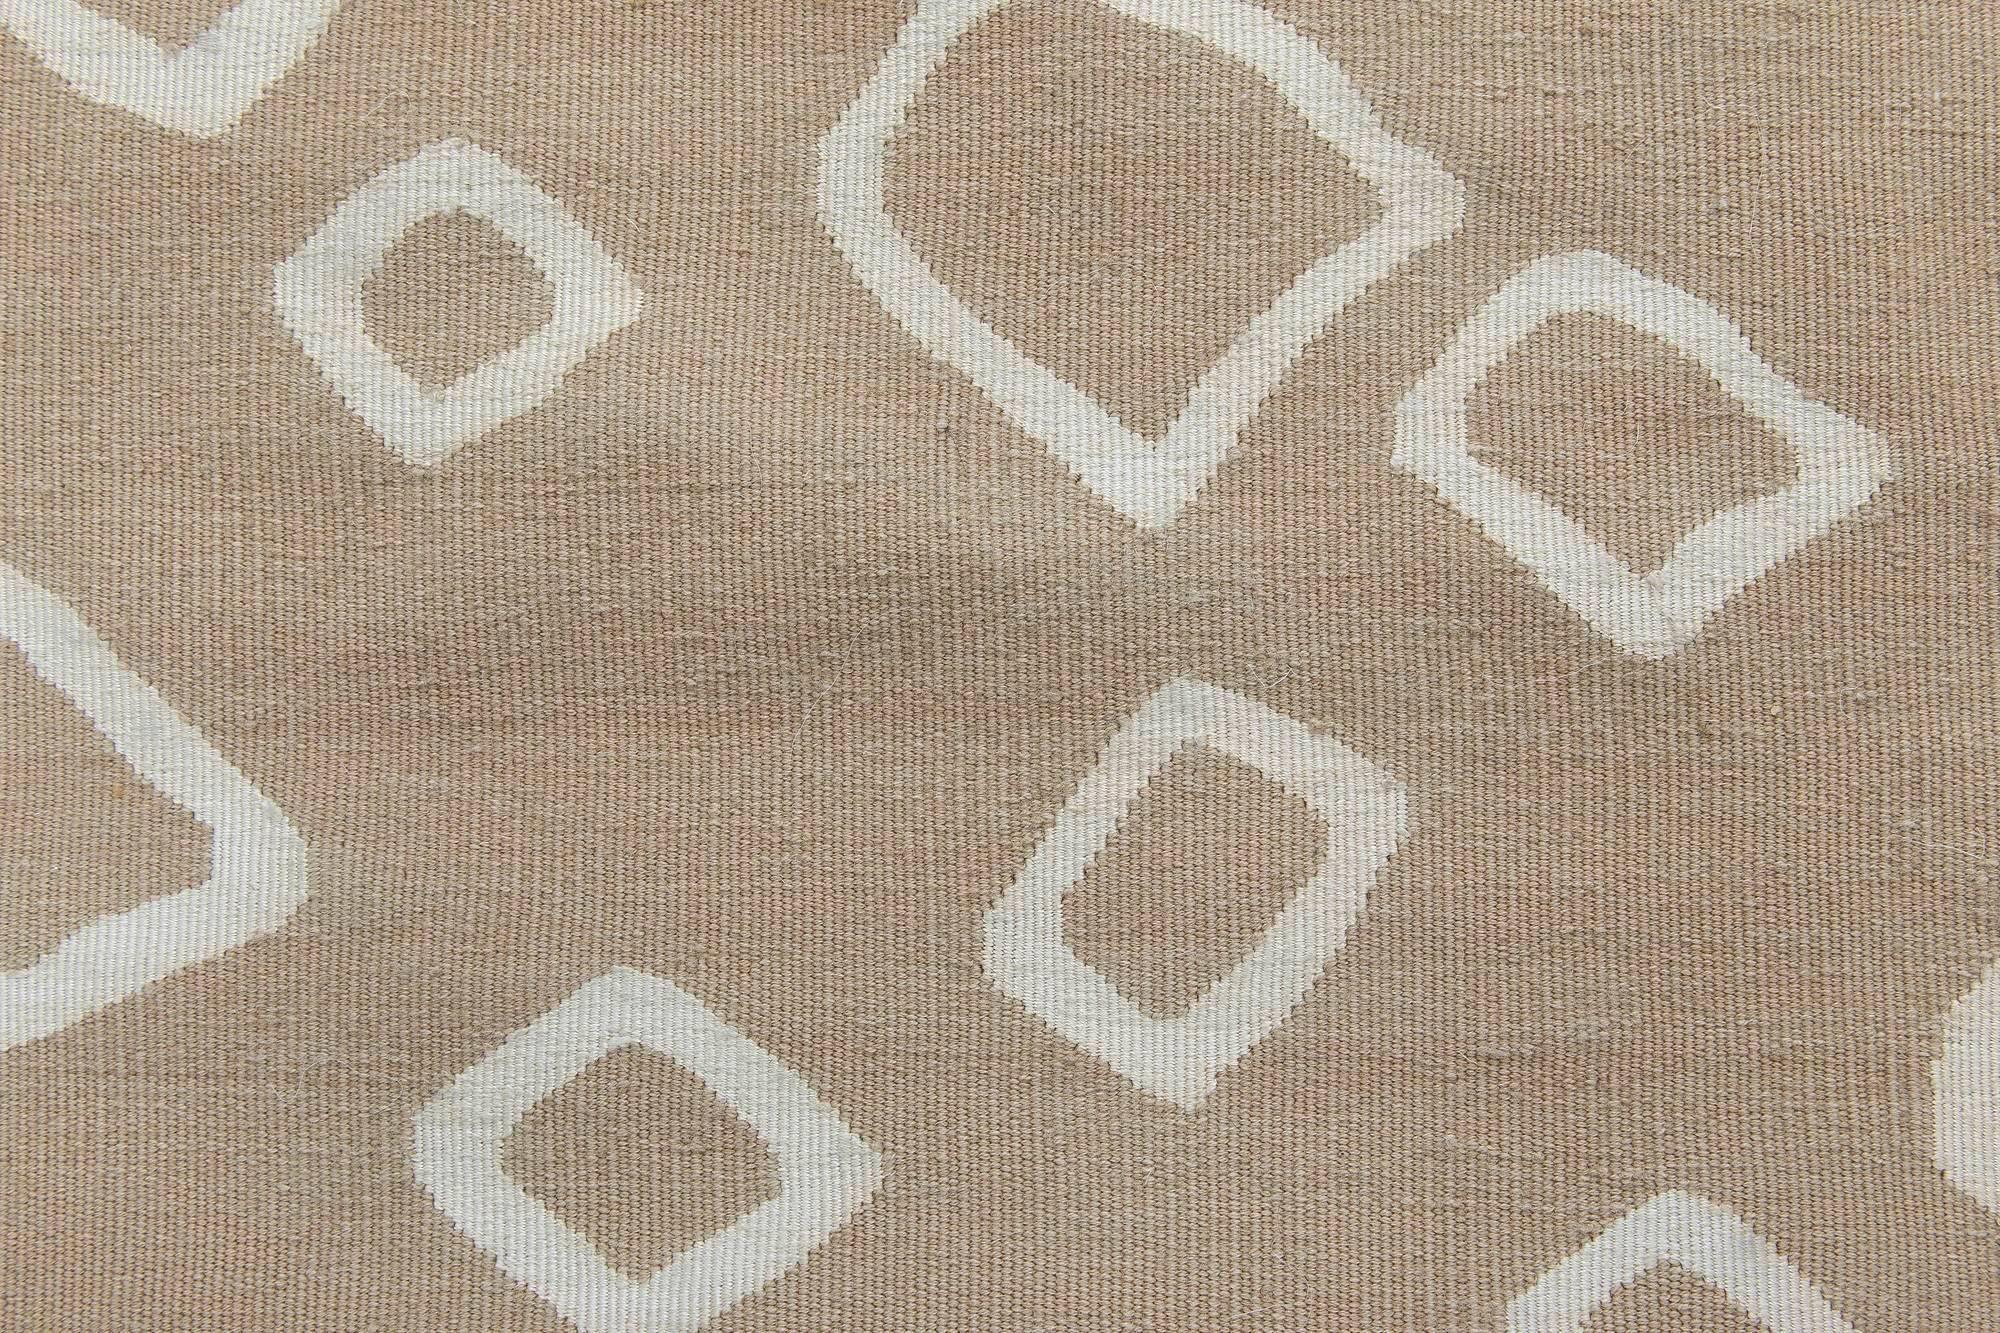 Contemporary beige and white flat-weave wool rug by Doris Leslie Blau
Size: 4'0